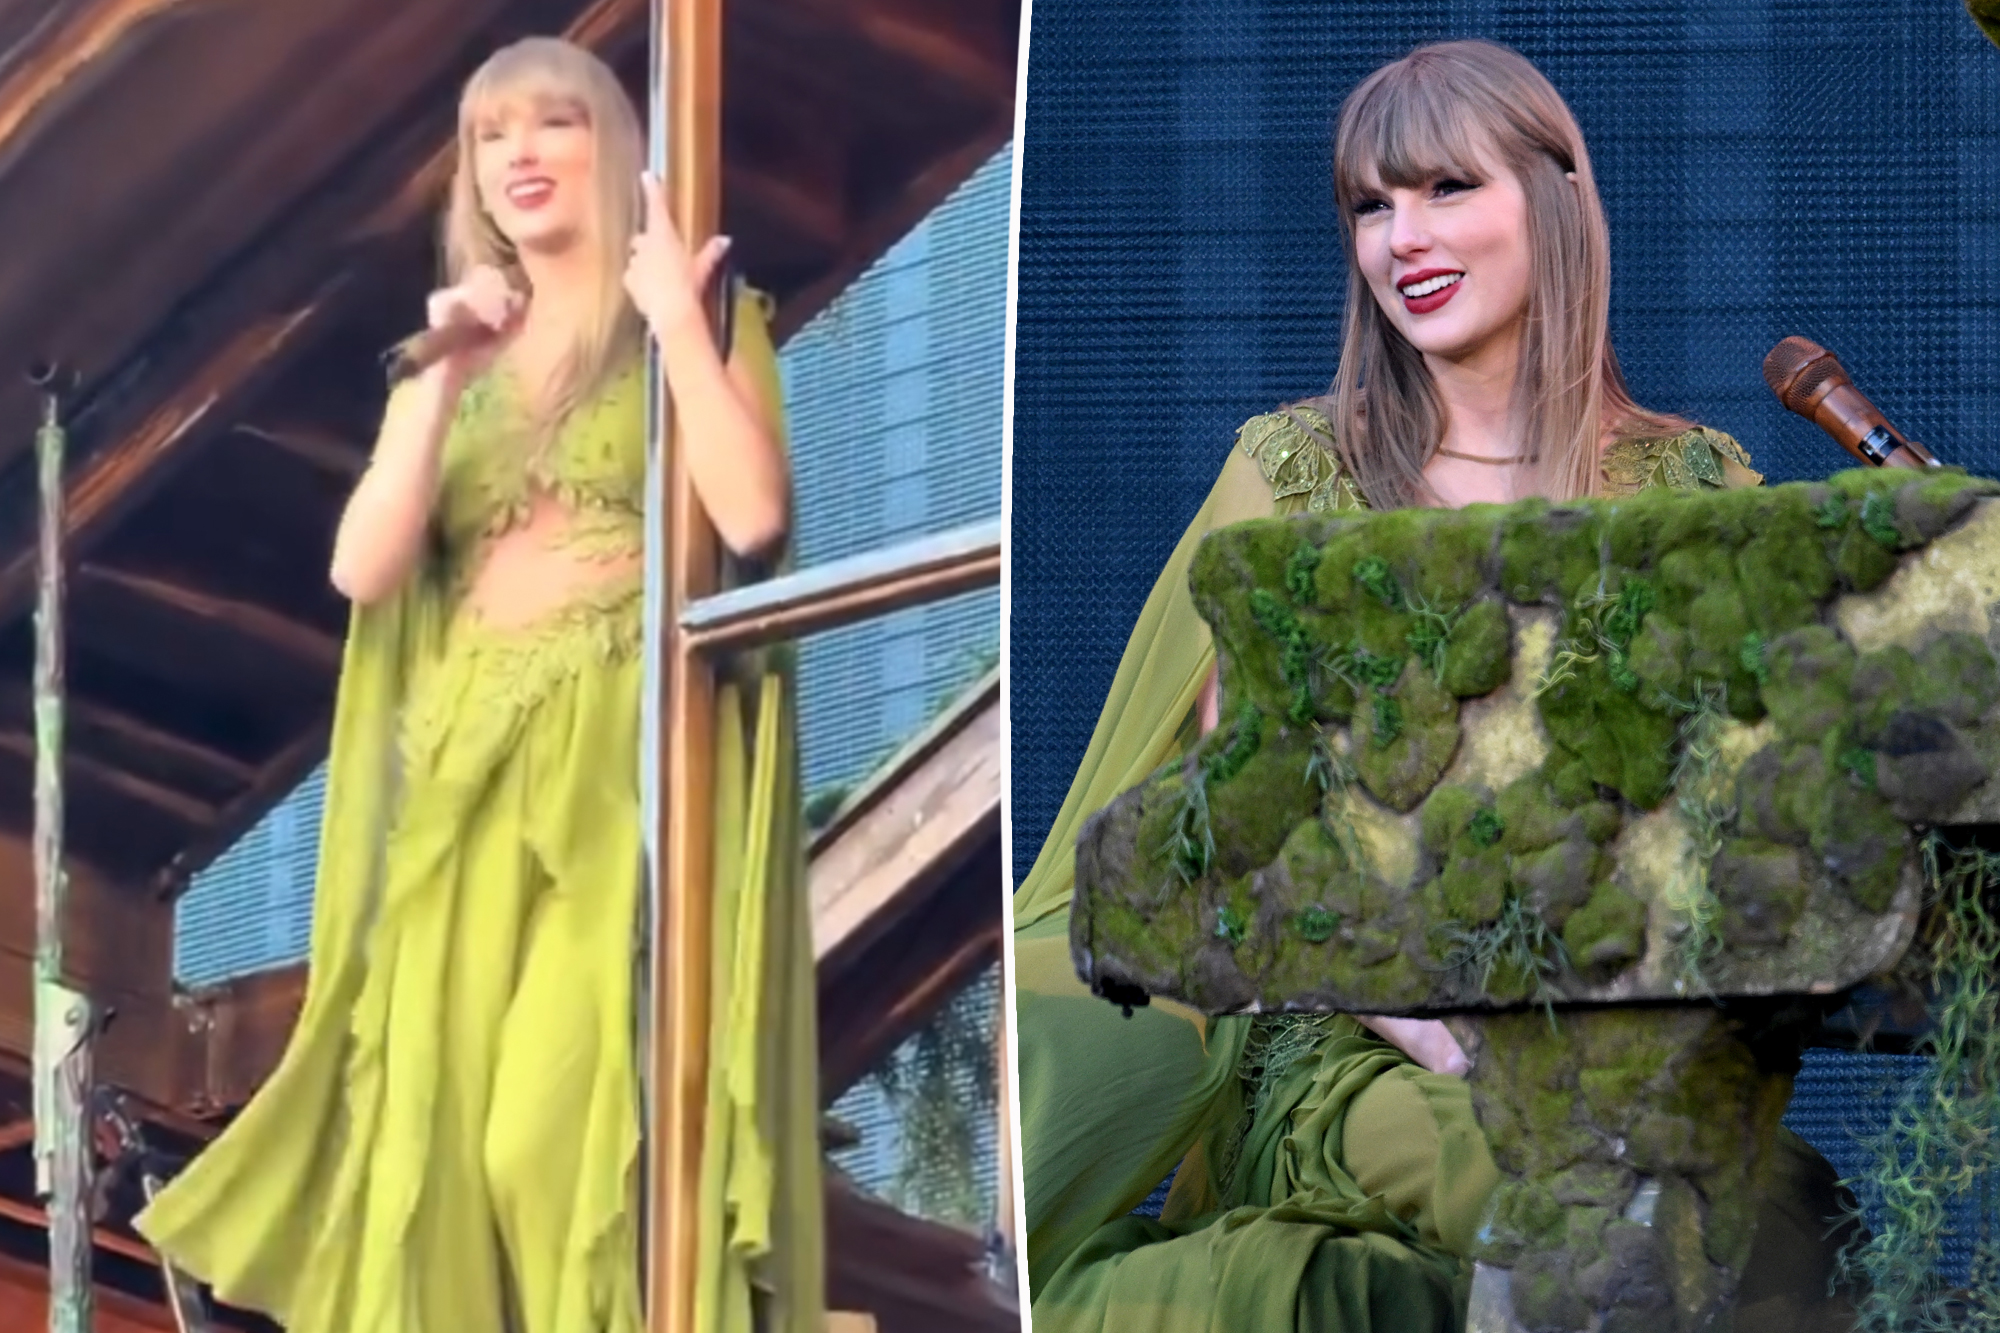 Taylor Swift Celebrates Love at Eras Tour: Congratulates Engaged Fans in Scotland